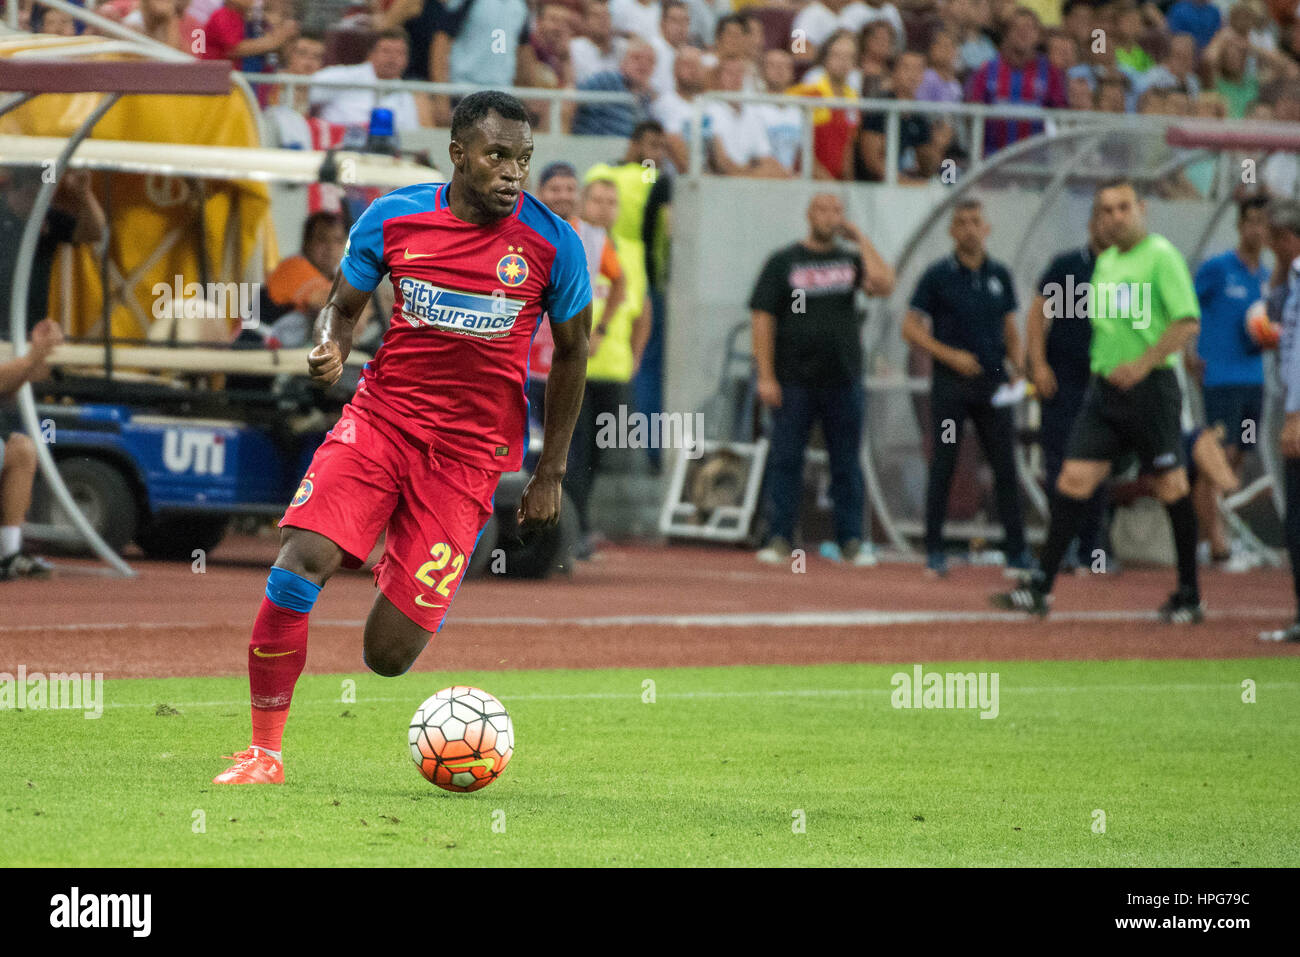 Steaua Bucuresti Team GrouprRESTRICTED SYNDICATION OF UCL  PORTRAITS.rSTRICTLY Stock Photo - Alamy